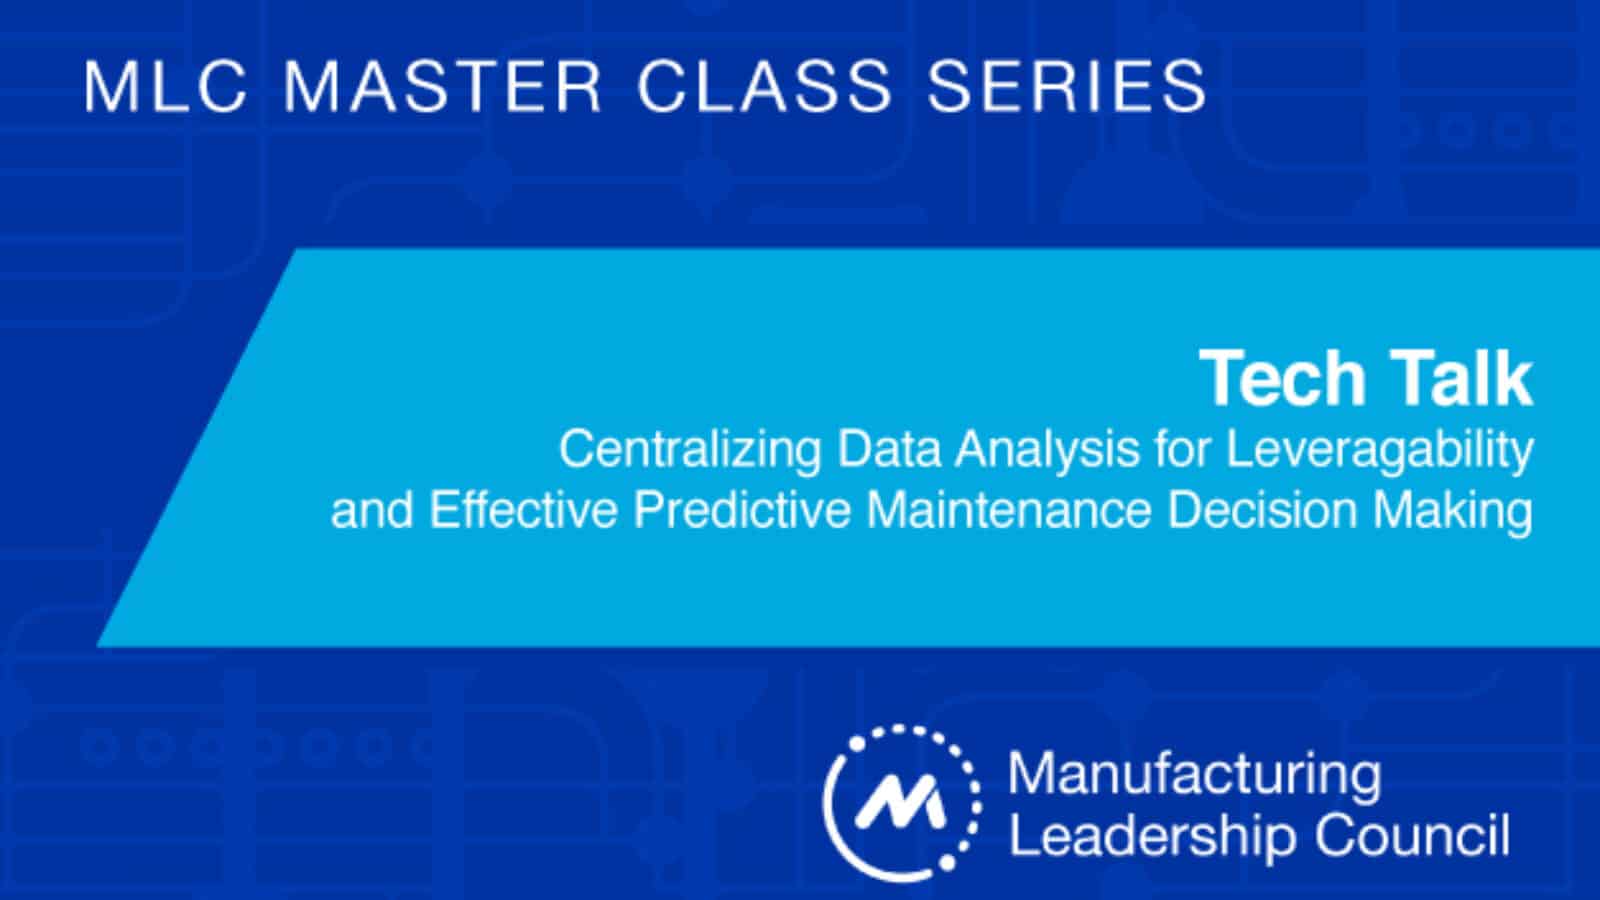 Master Class Tech Talk: Centralizing Data Analysis for Leveragability and Effective Predictive Maintenance Decision Making